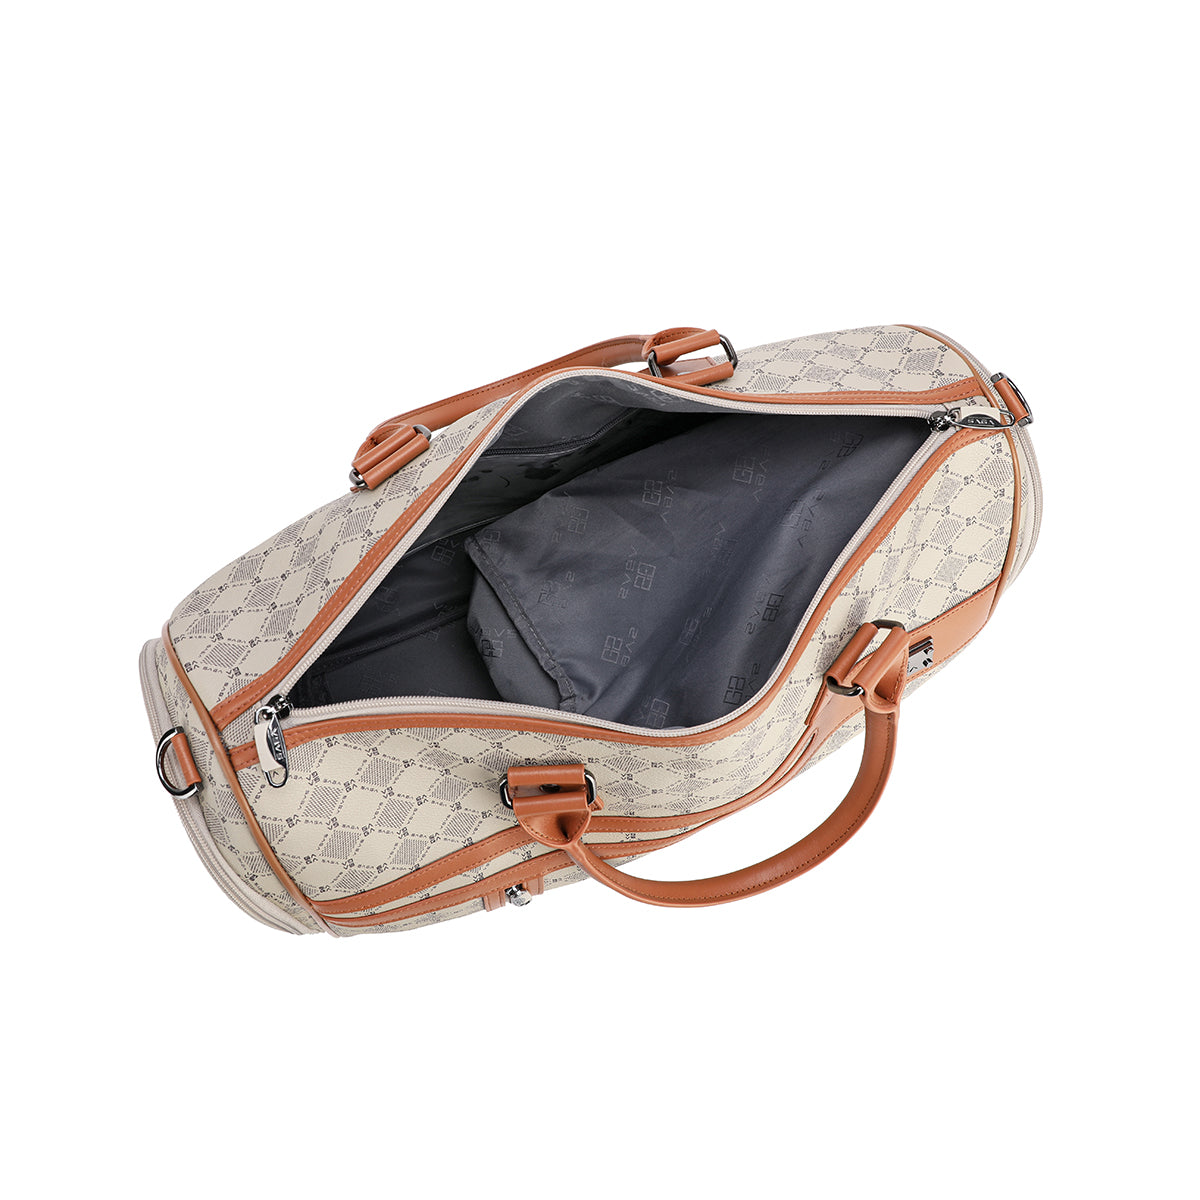 Travel bag suitable for airplanes, size 18 inches, khaki color